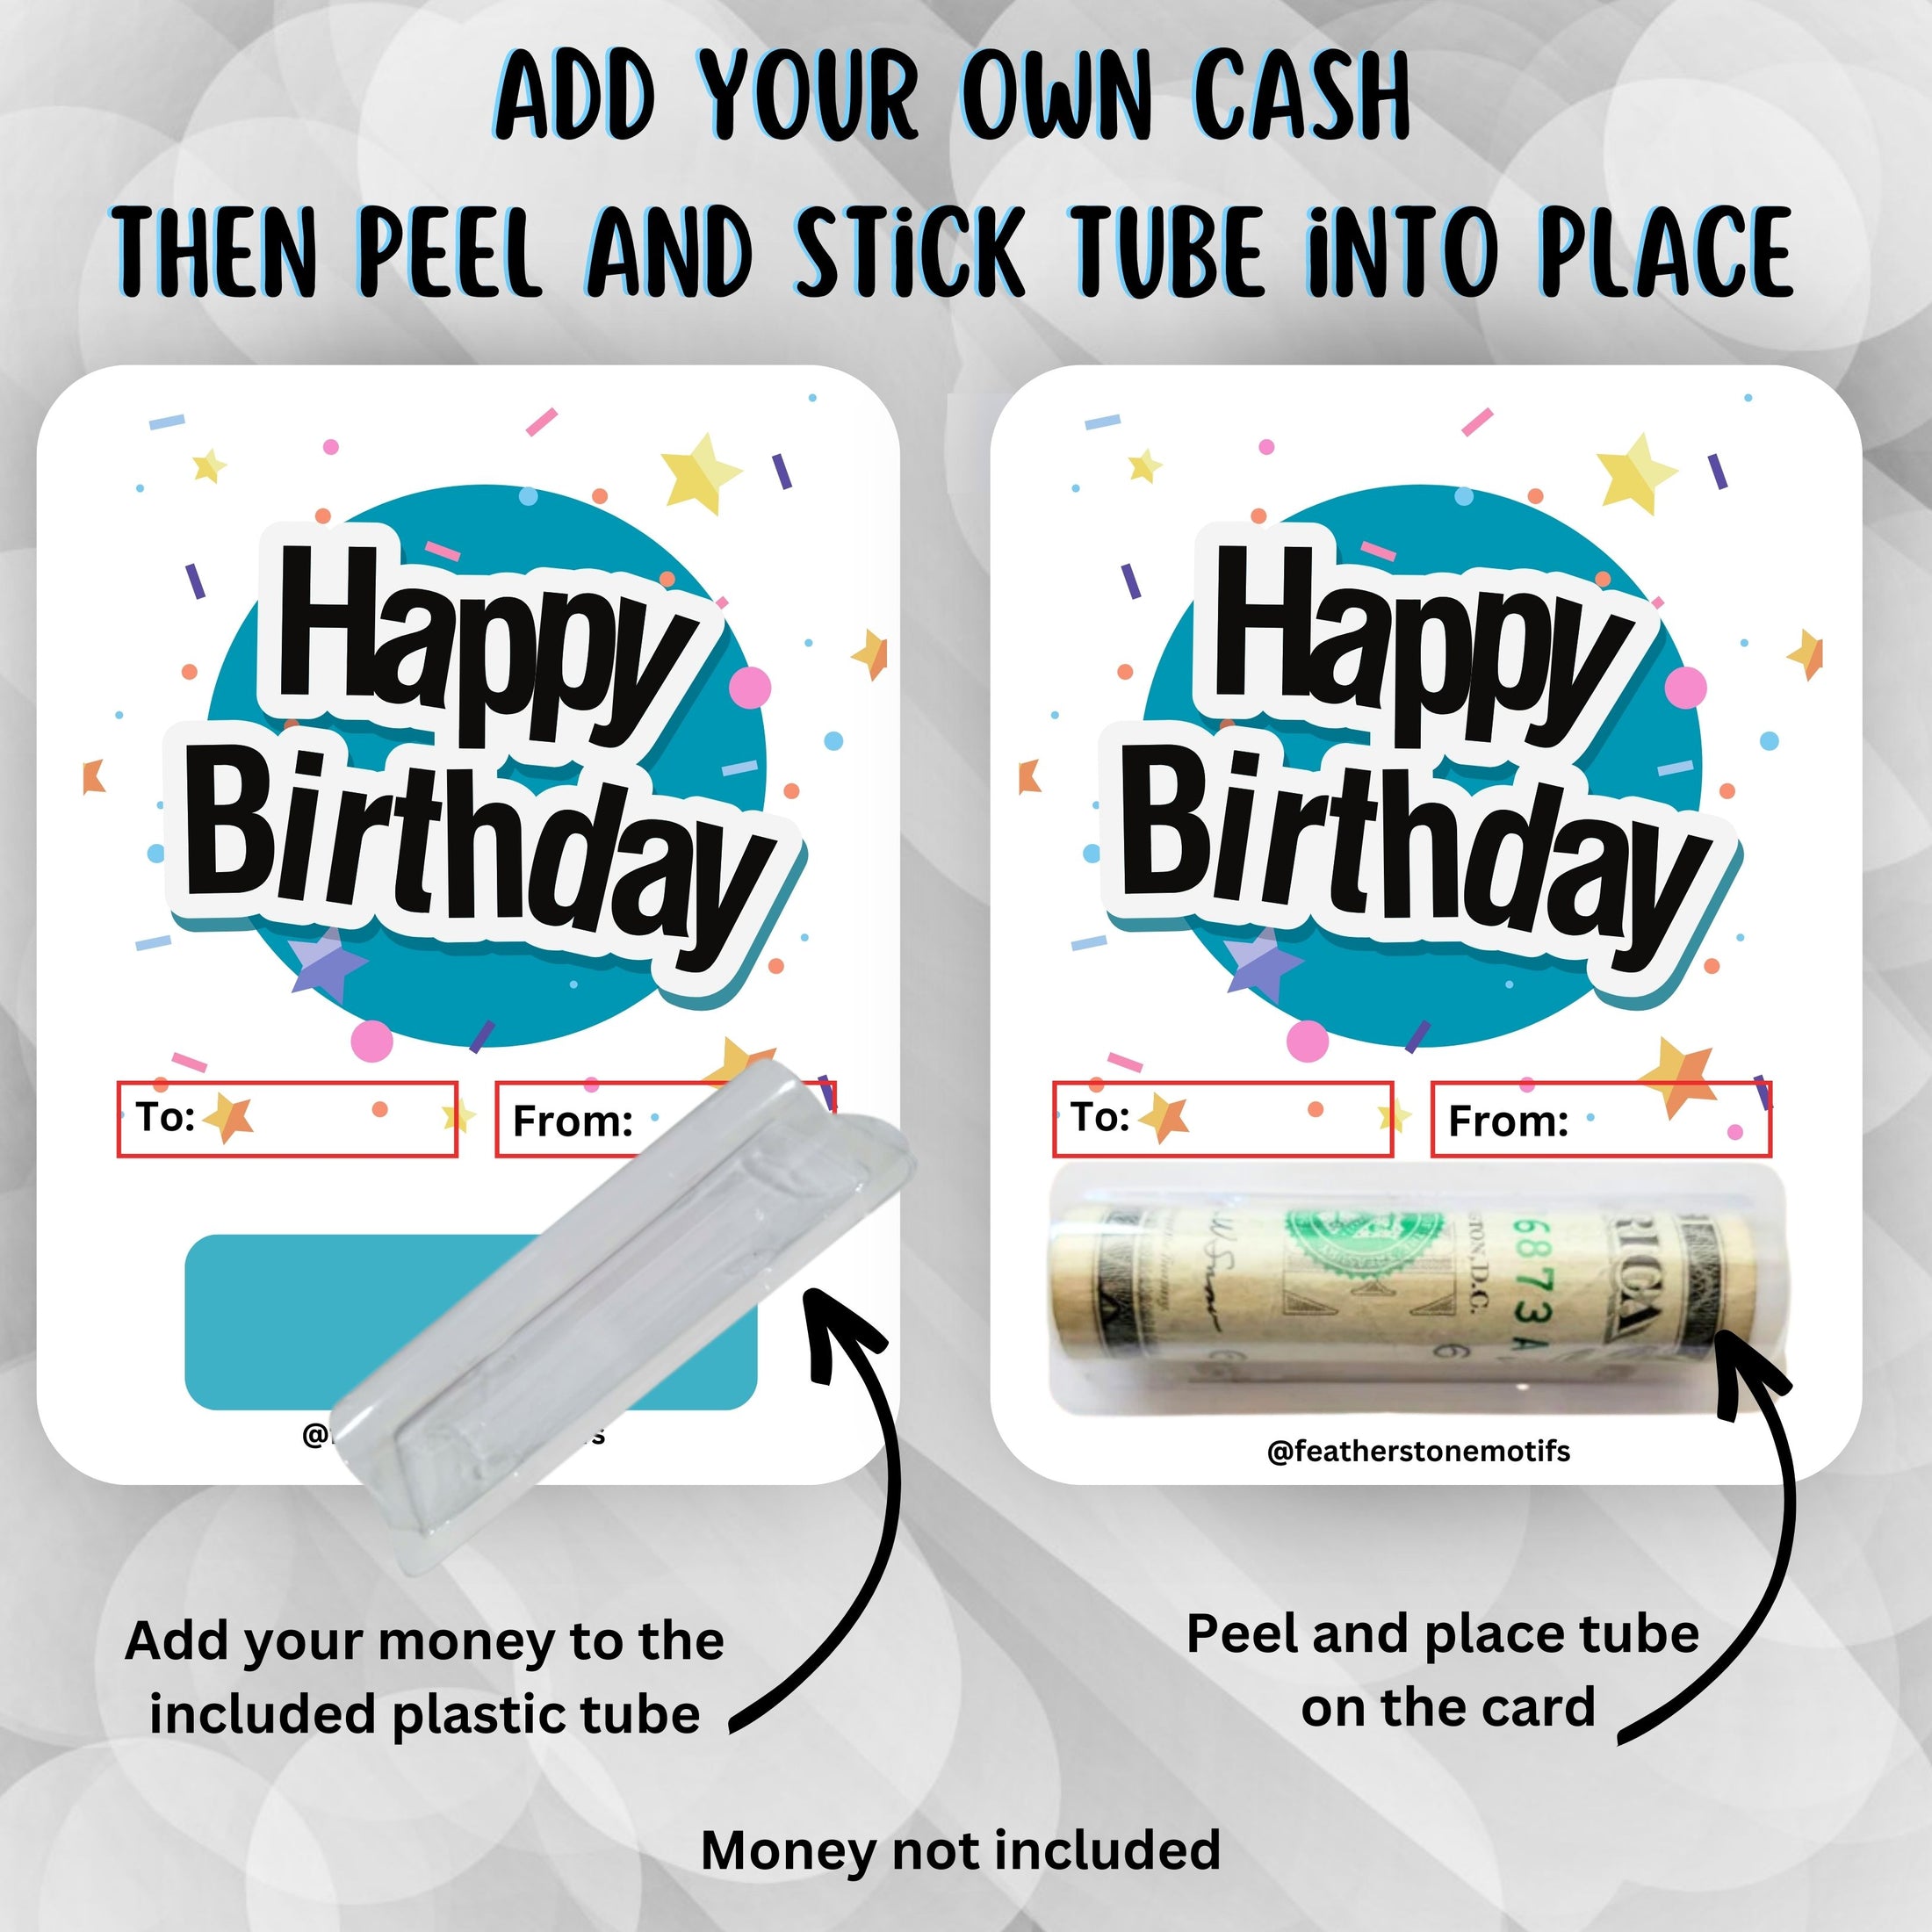 This image shows how to attach the money tube to the Blue Happy Birthday Money Card.